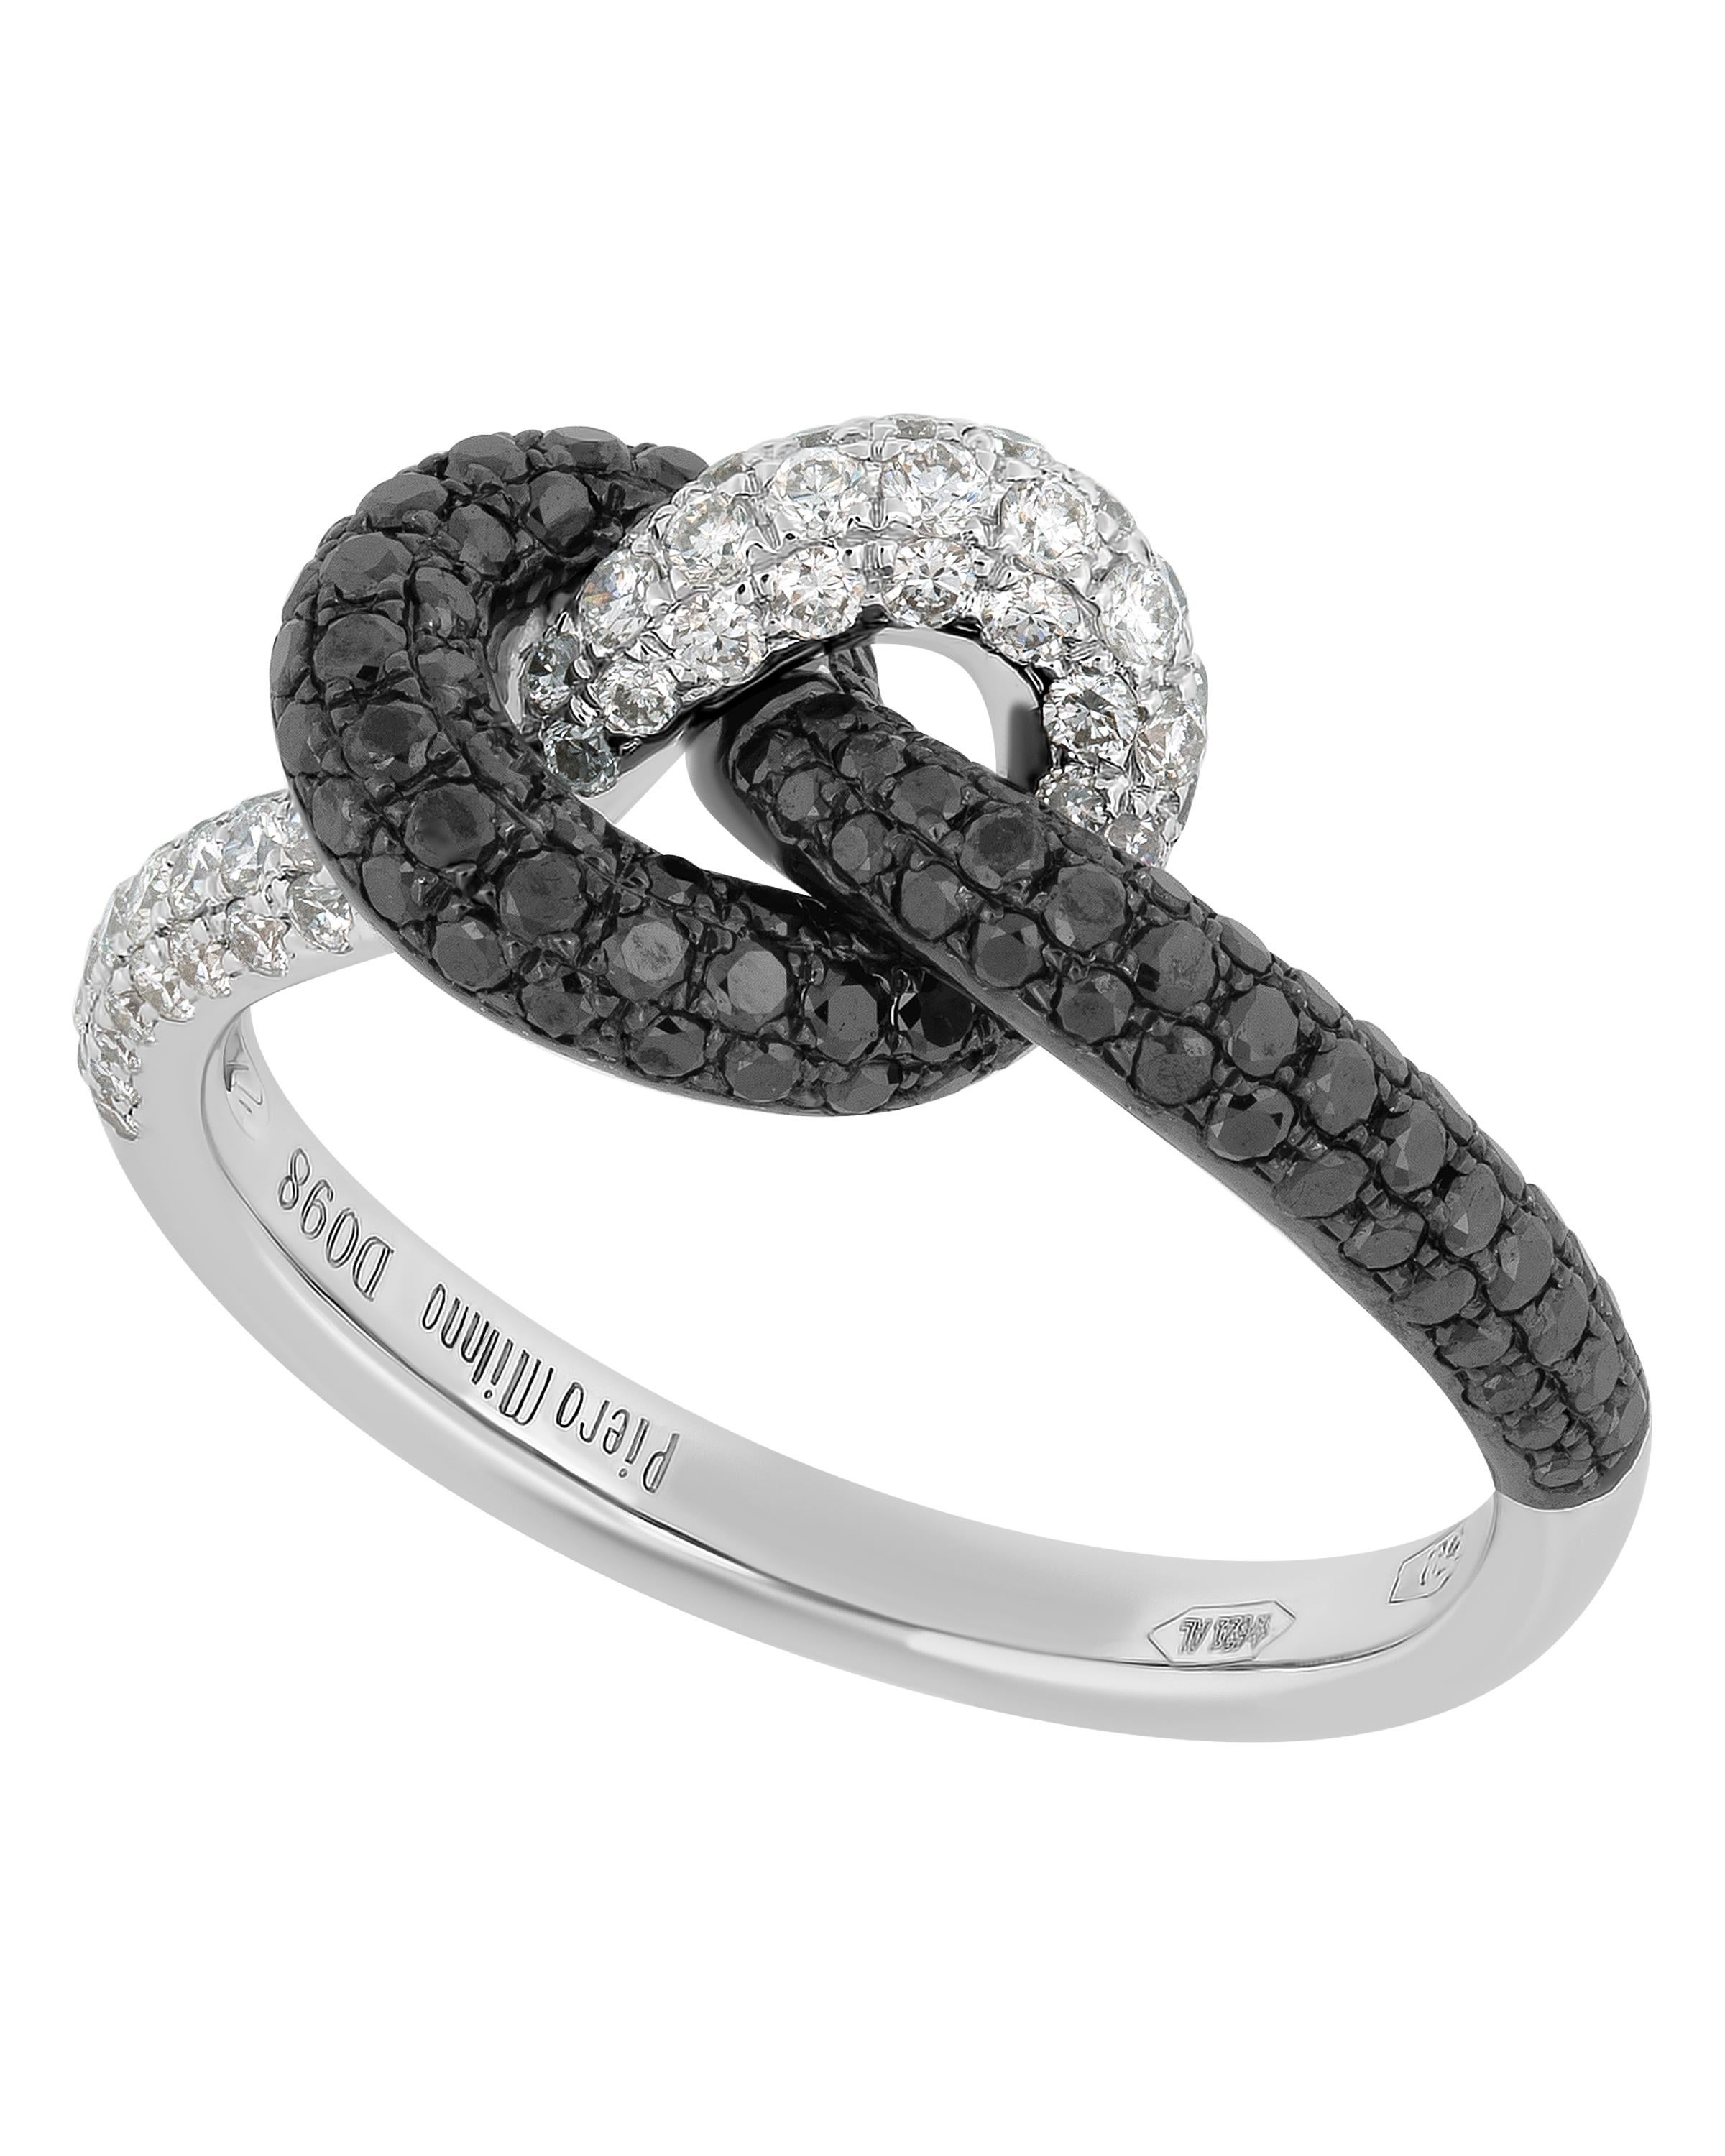 This striking Piero Milano 18K White Gold and 18K Black Gold Knot Ring features luscious black 0.6ct. tw. and white diamonds 0.38ct. tw. twisted into a delicate knot. The ring size is 7 (54.4). The Decoration Size is 10.5mm. The Weight is 4.4g.